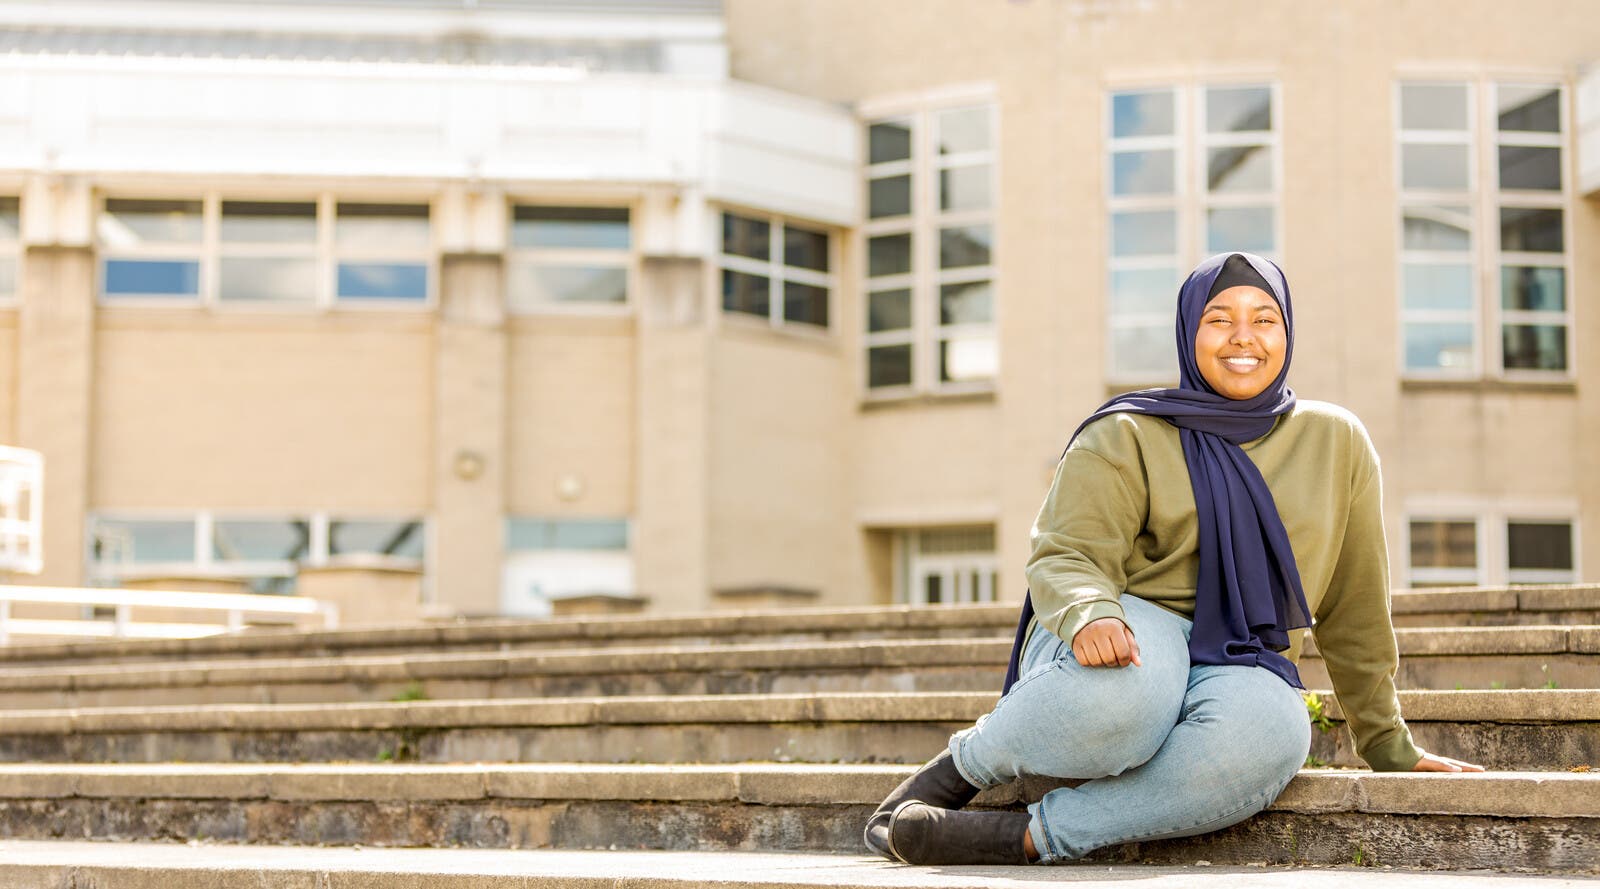 Student smiling and sitting on steps outside campus